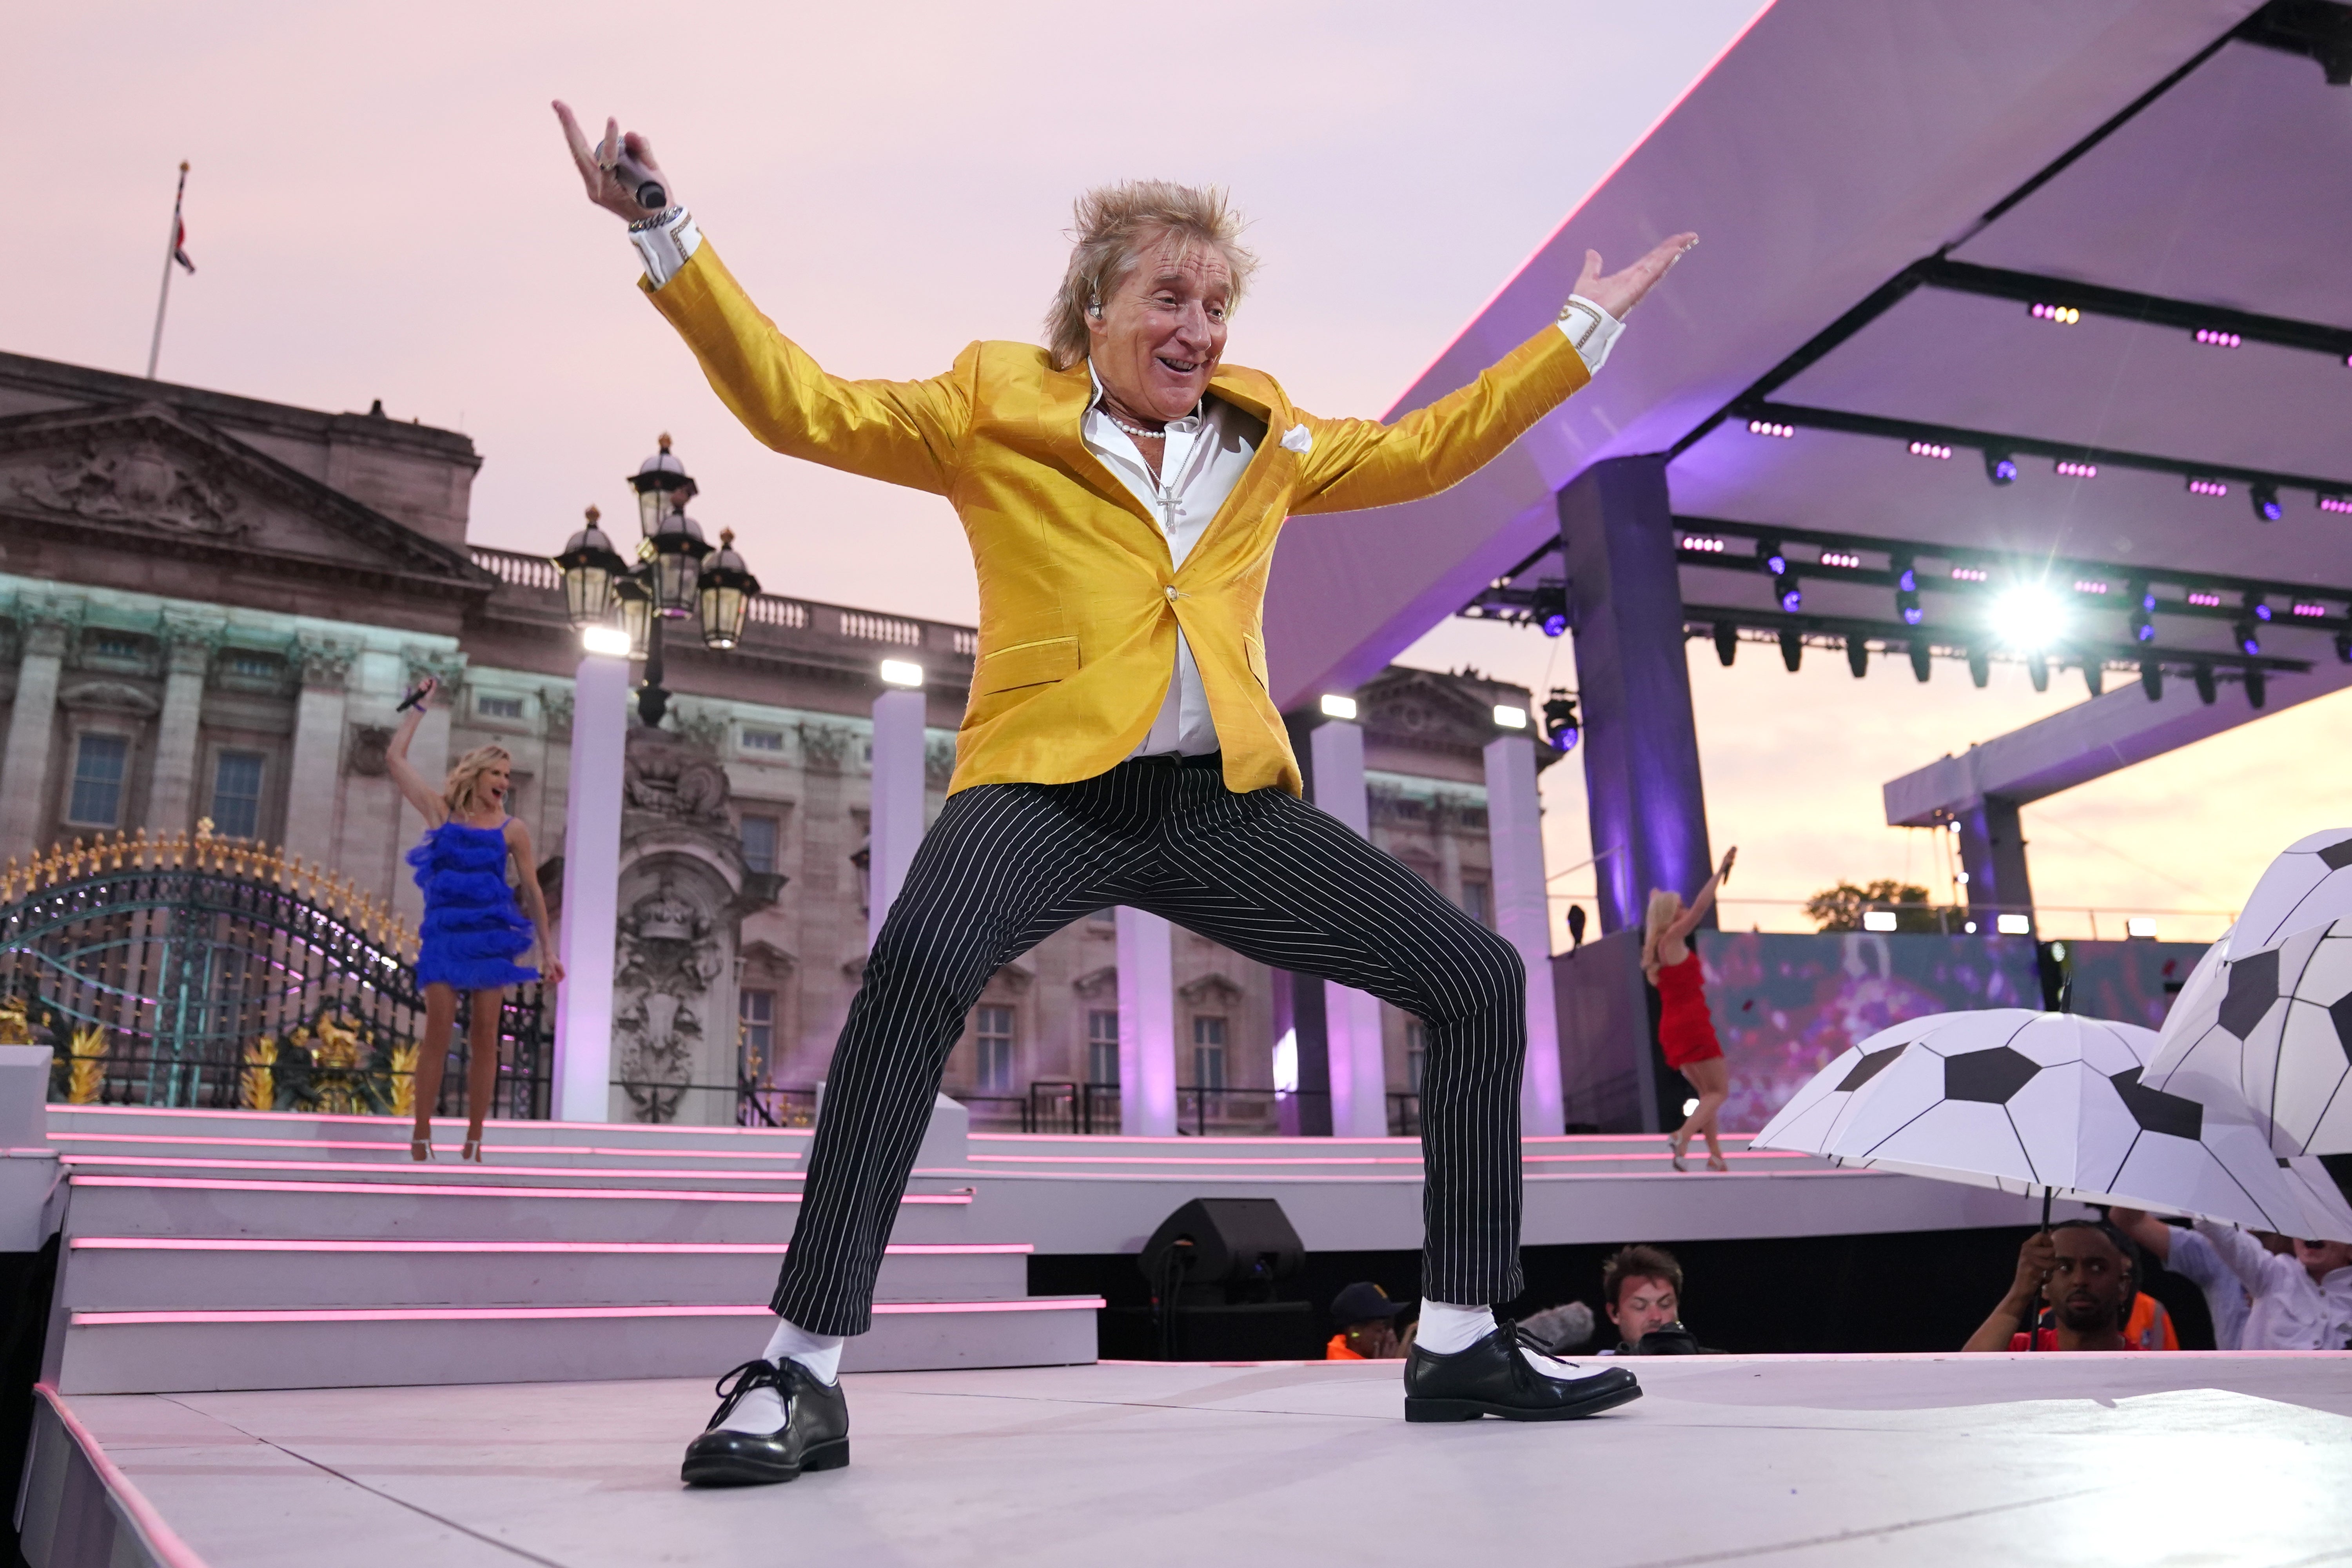 Prior to turning down a lucrative deal with Saudi Arabia, Rod Stewart had declined $1m to perform in Qatar because of the country’s human rights record